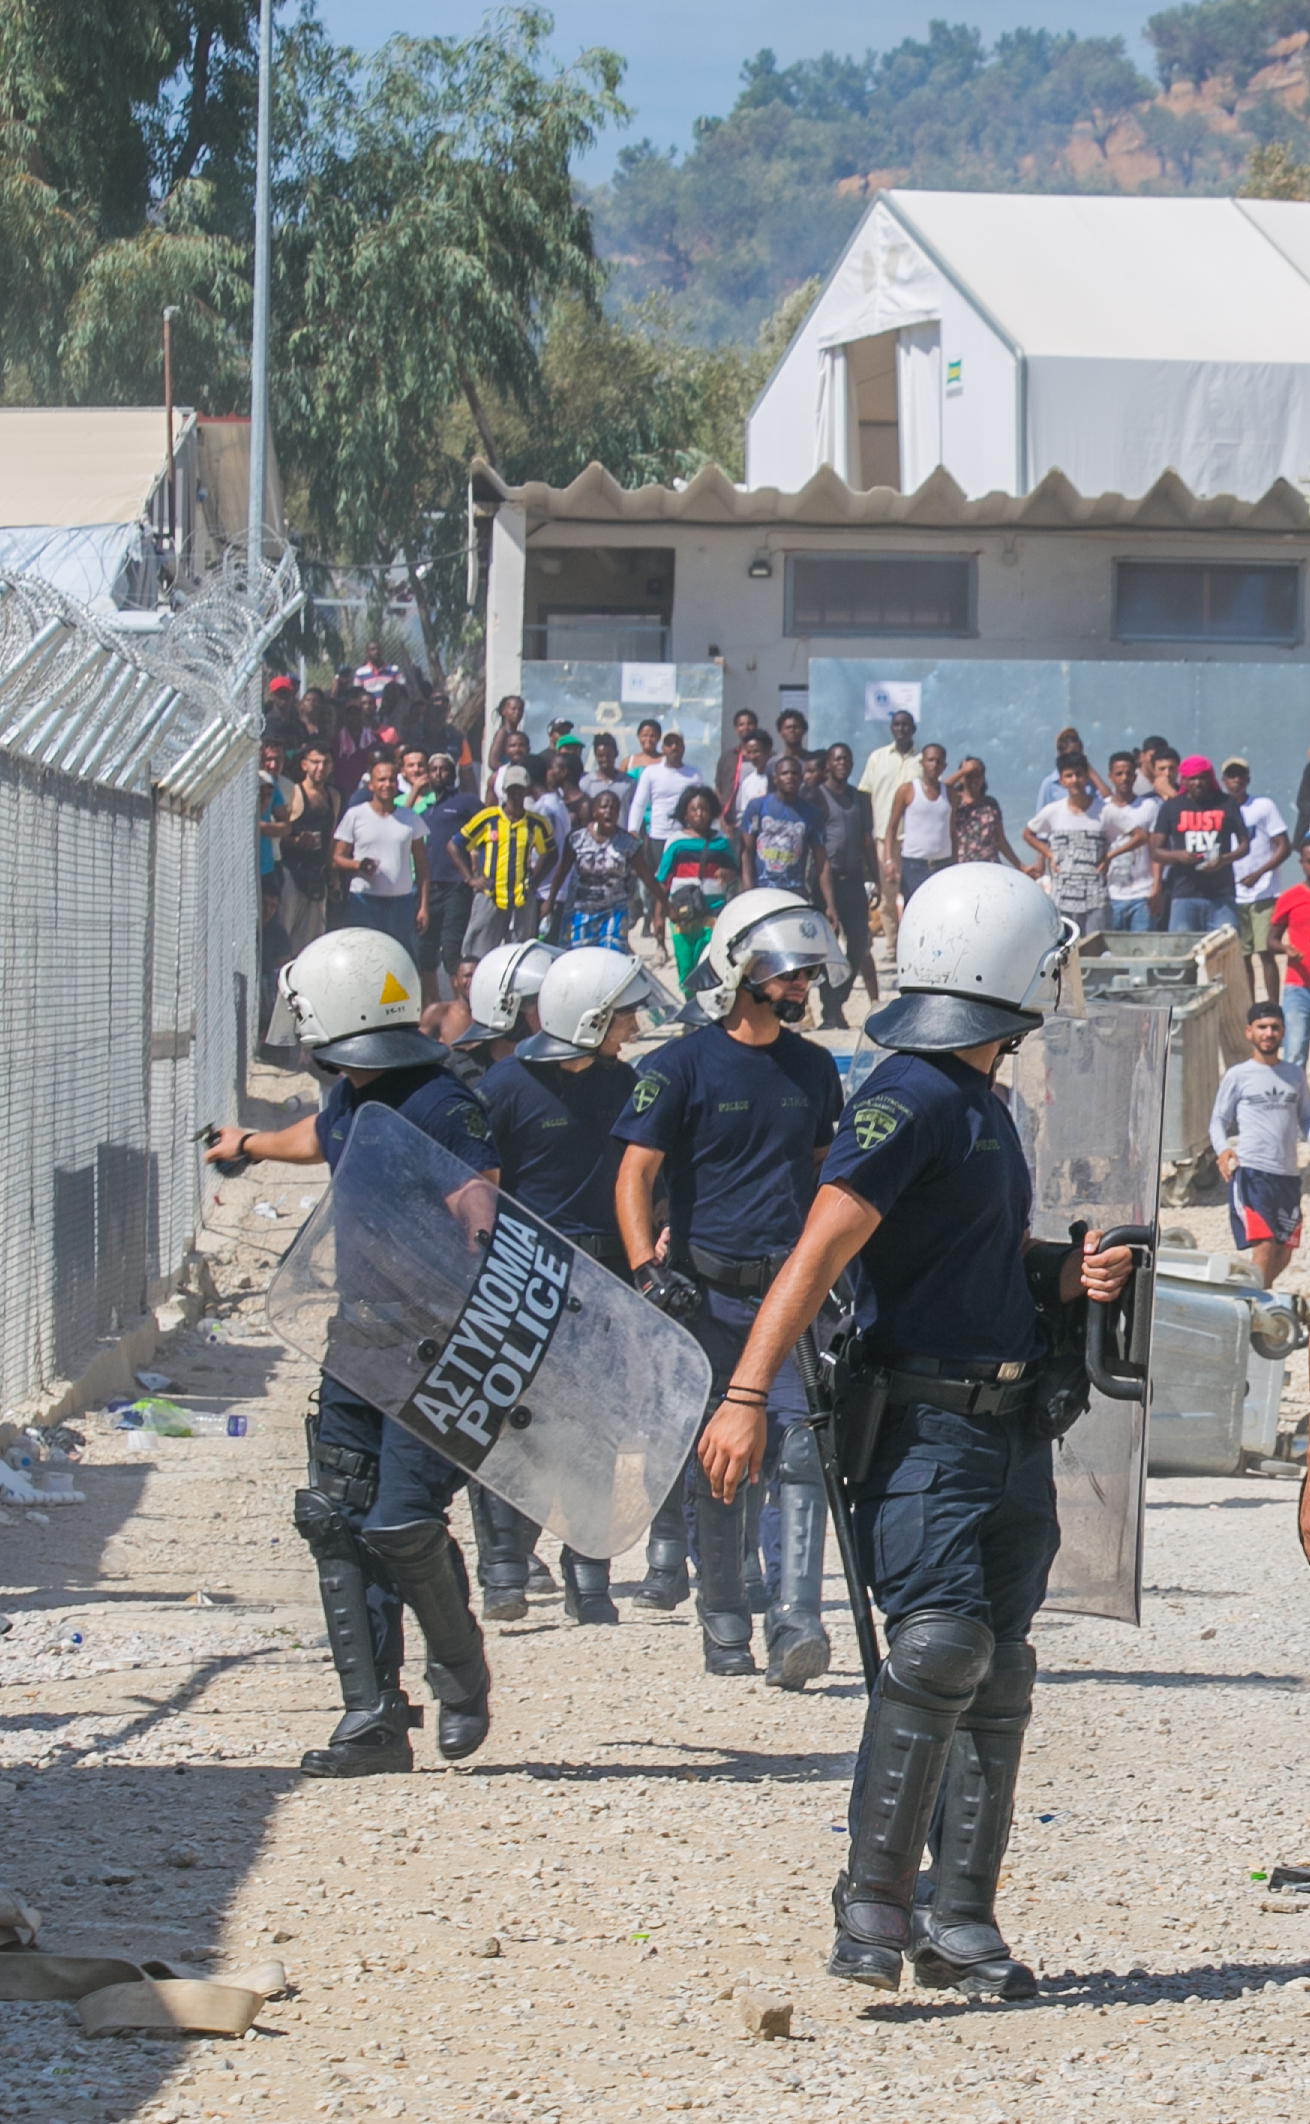   mikeschwarzthekid Riot police react as a crowd of Turkish and Syrian refugees begin to throw rocks outside the entrance to a camp in Moria, Lesvos. The riot began earlier this morning with refugees flipping dumpsters, lighting trash on fire, and ta